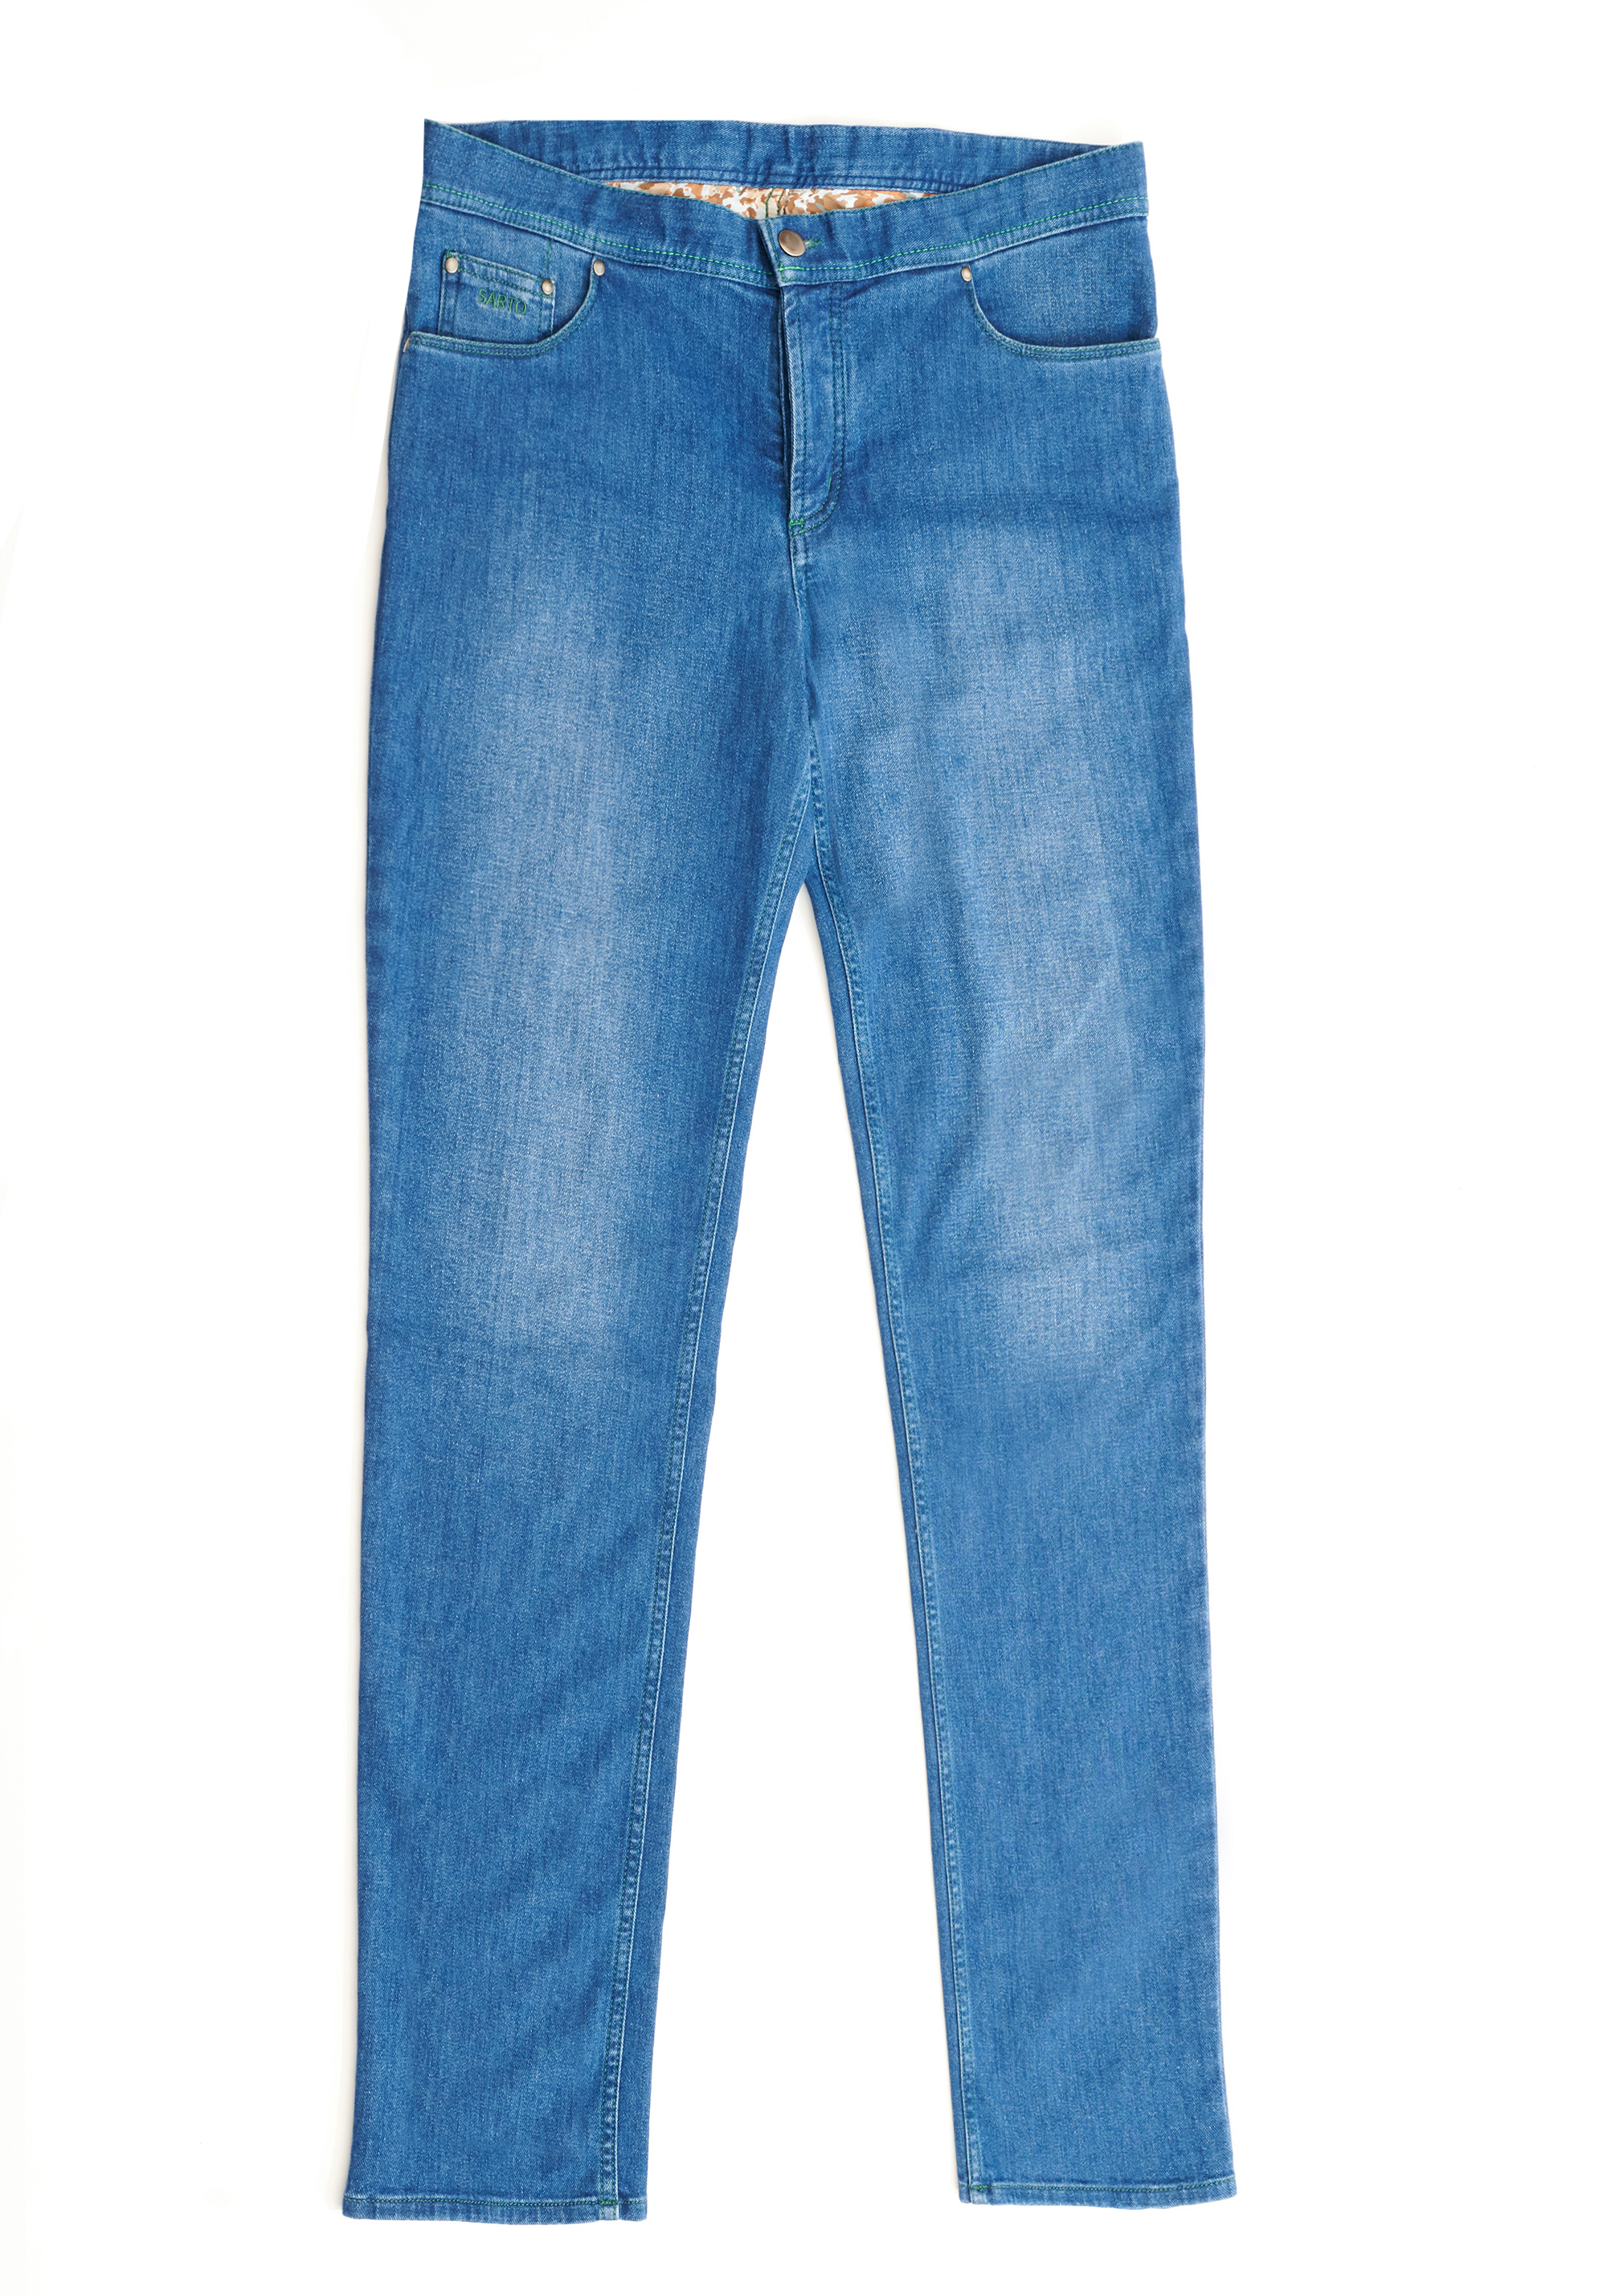 Azure Jeans Made to Measure